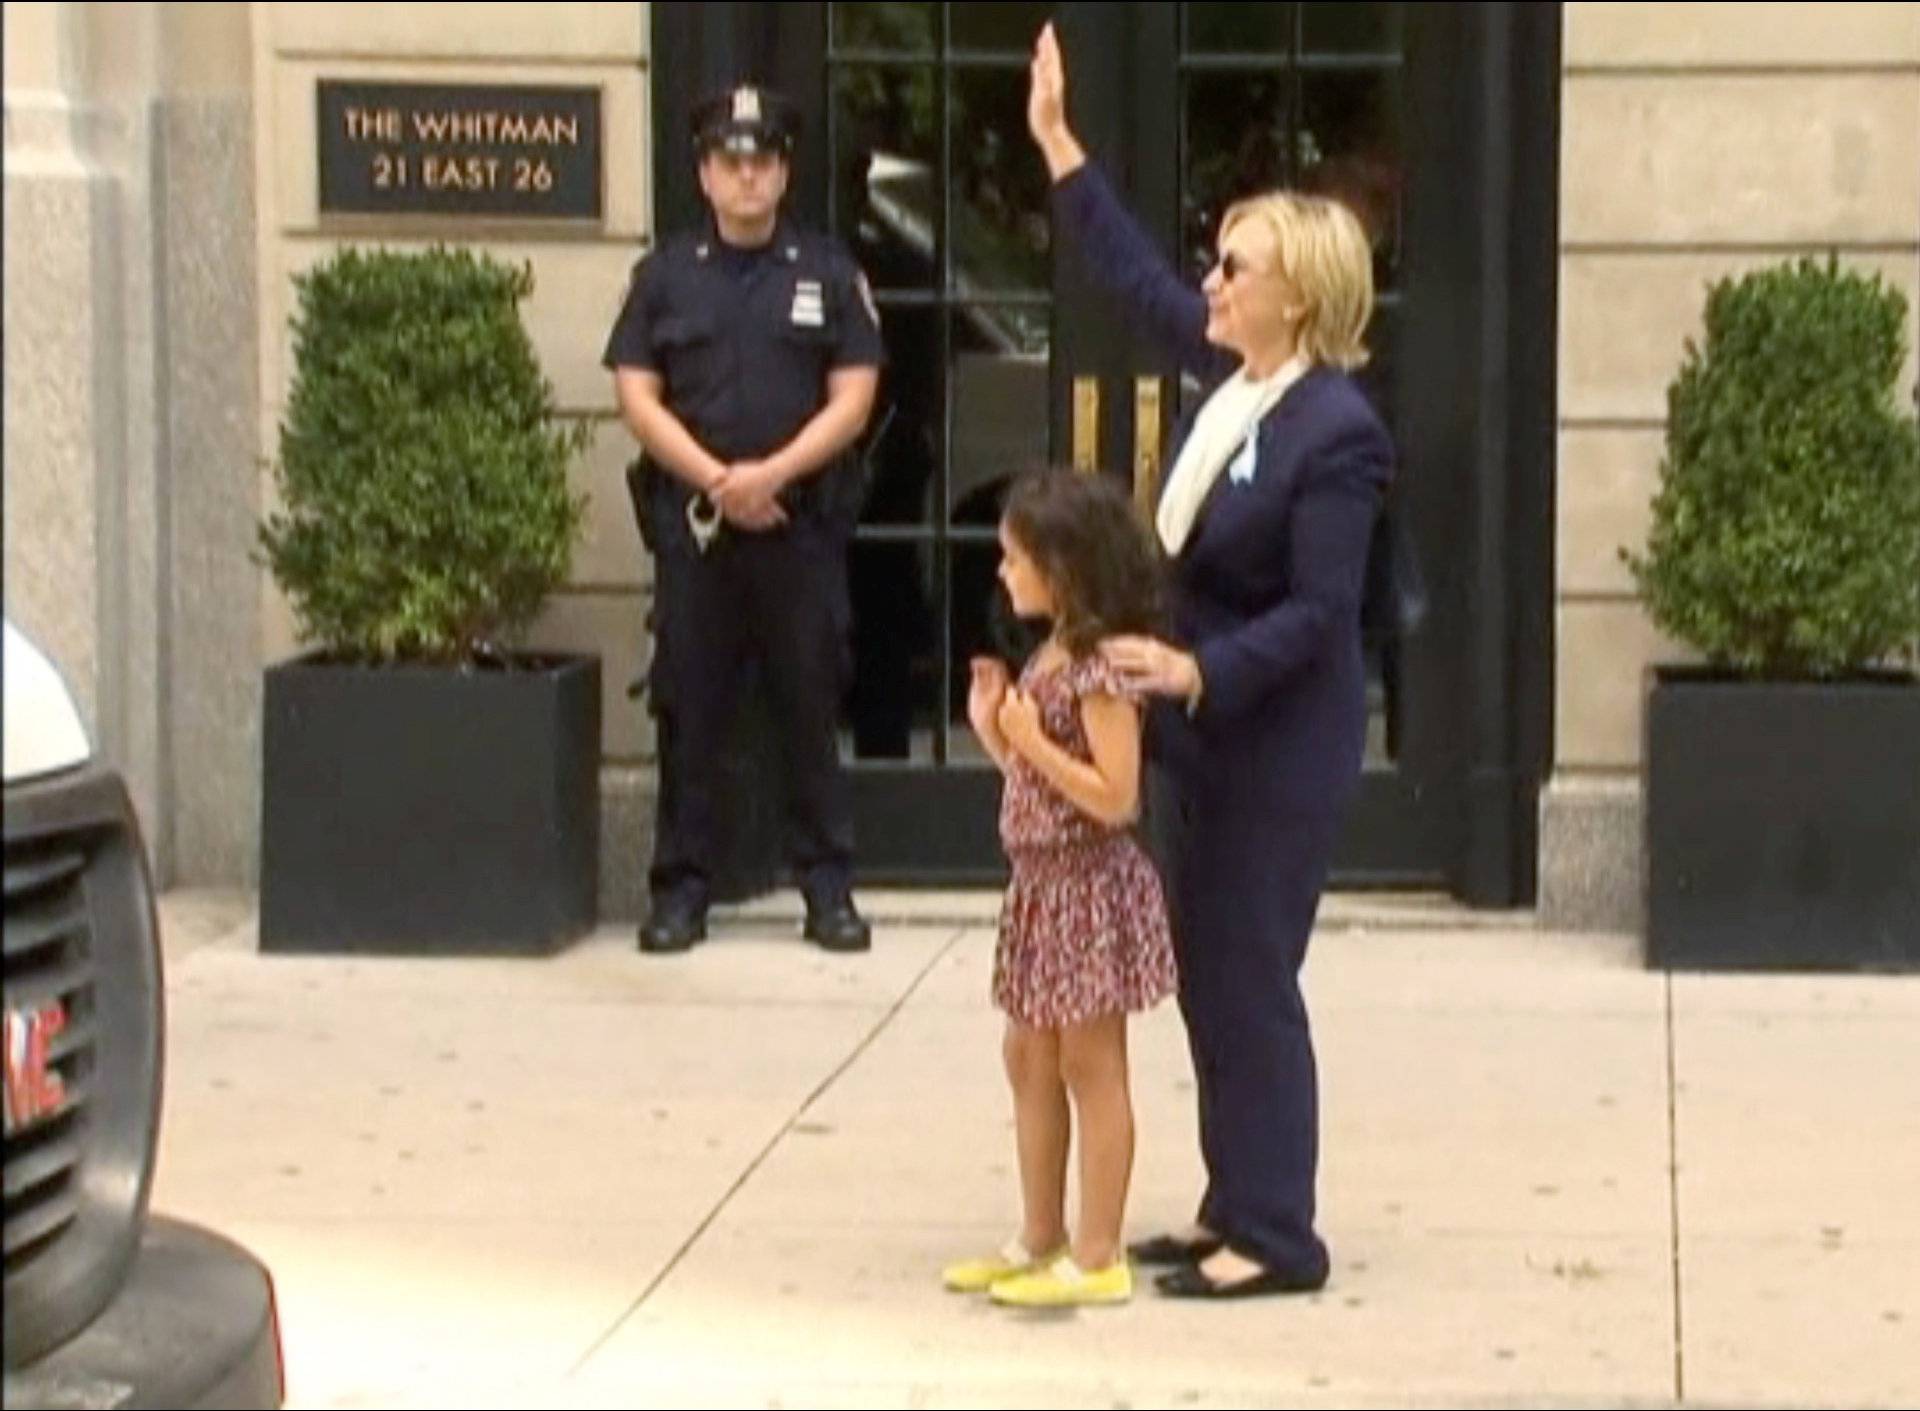 U.S. Democratic presidential nominee Hillary Clinton greets a girl on the sidewalk after leaving her daughter Chelsea's home in New York